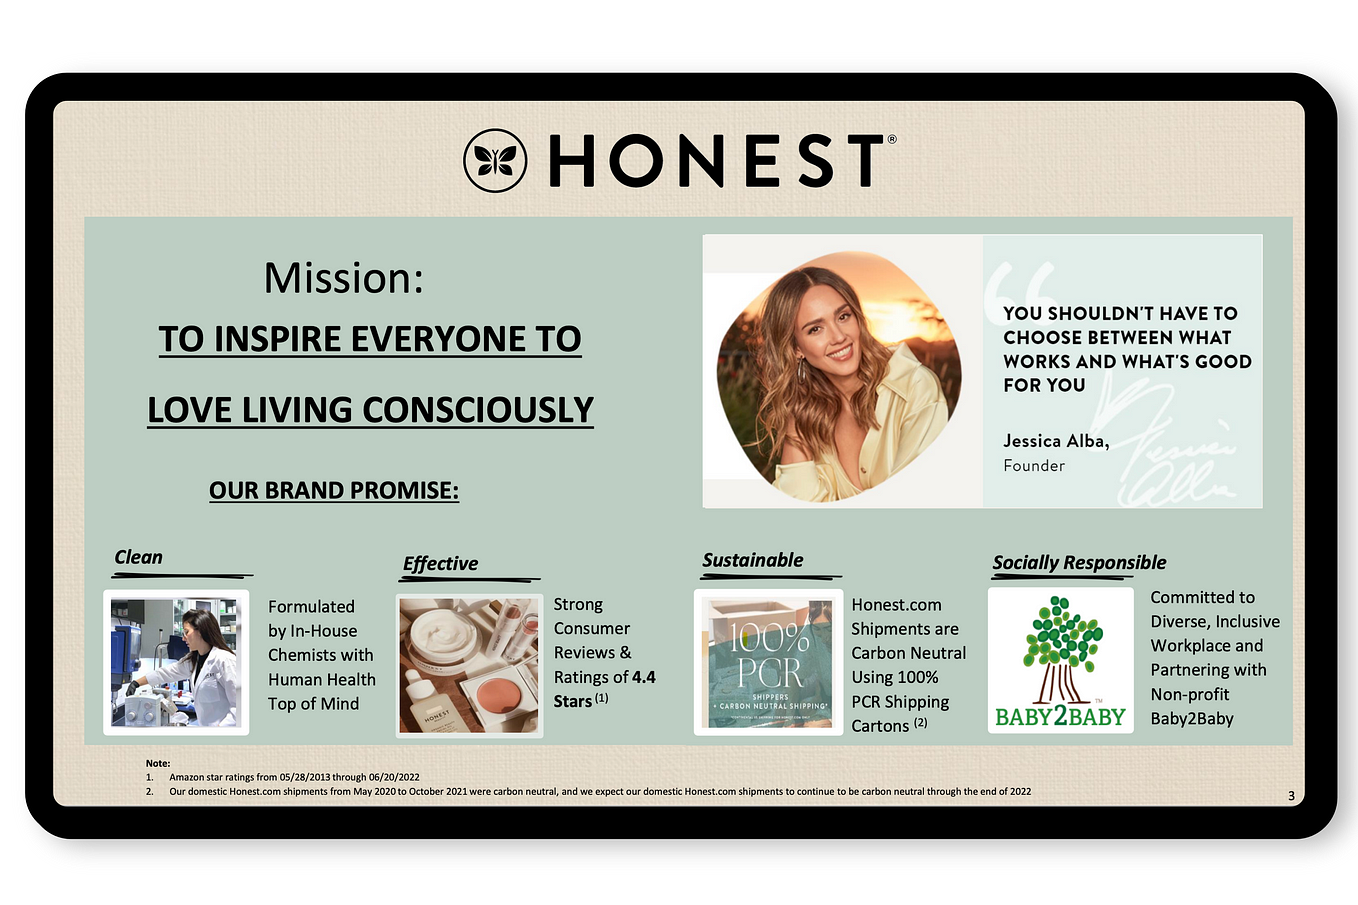 Jessica Alba’s Honest Company Went From $1.5 Billion to $150 Million Because They Lied.